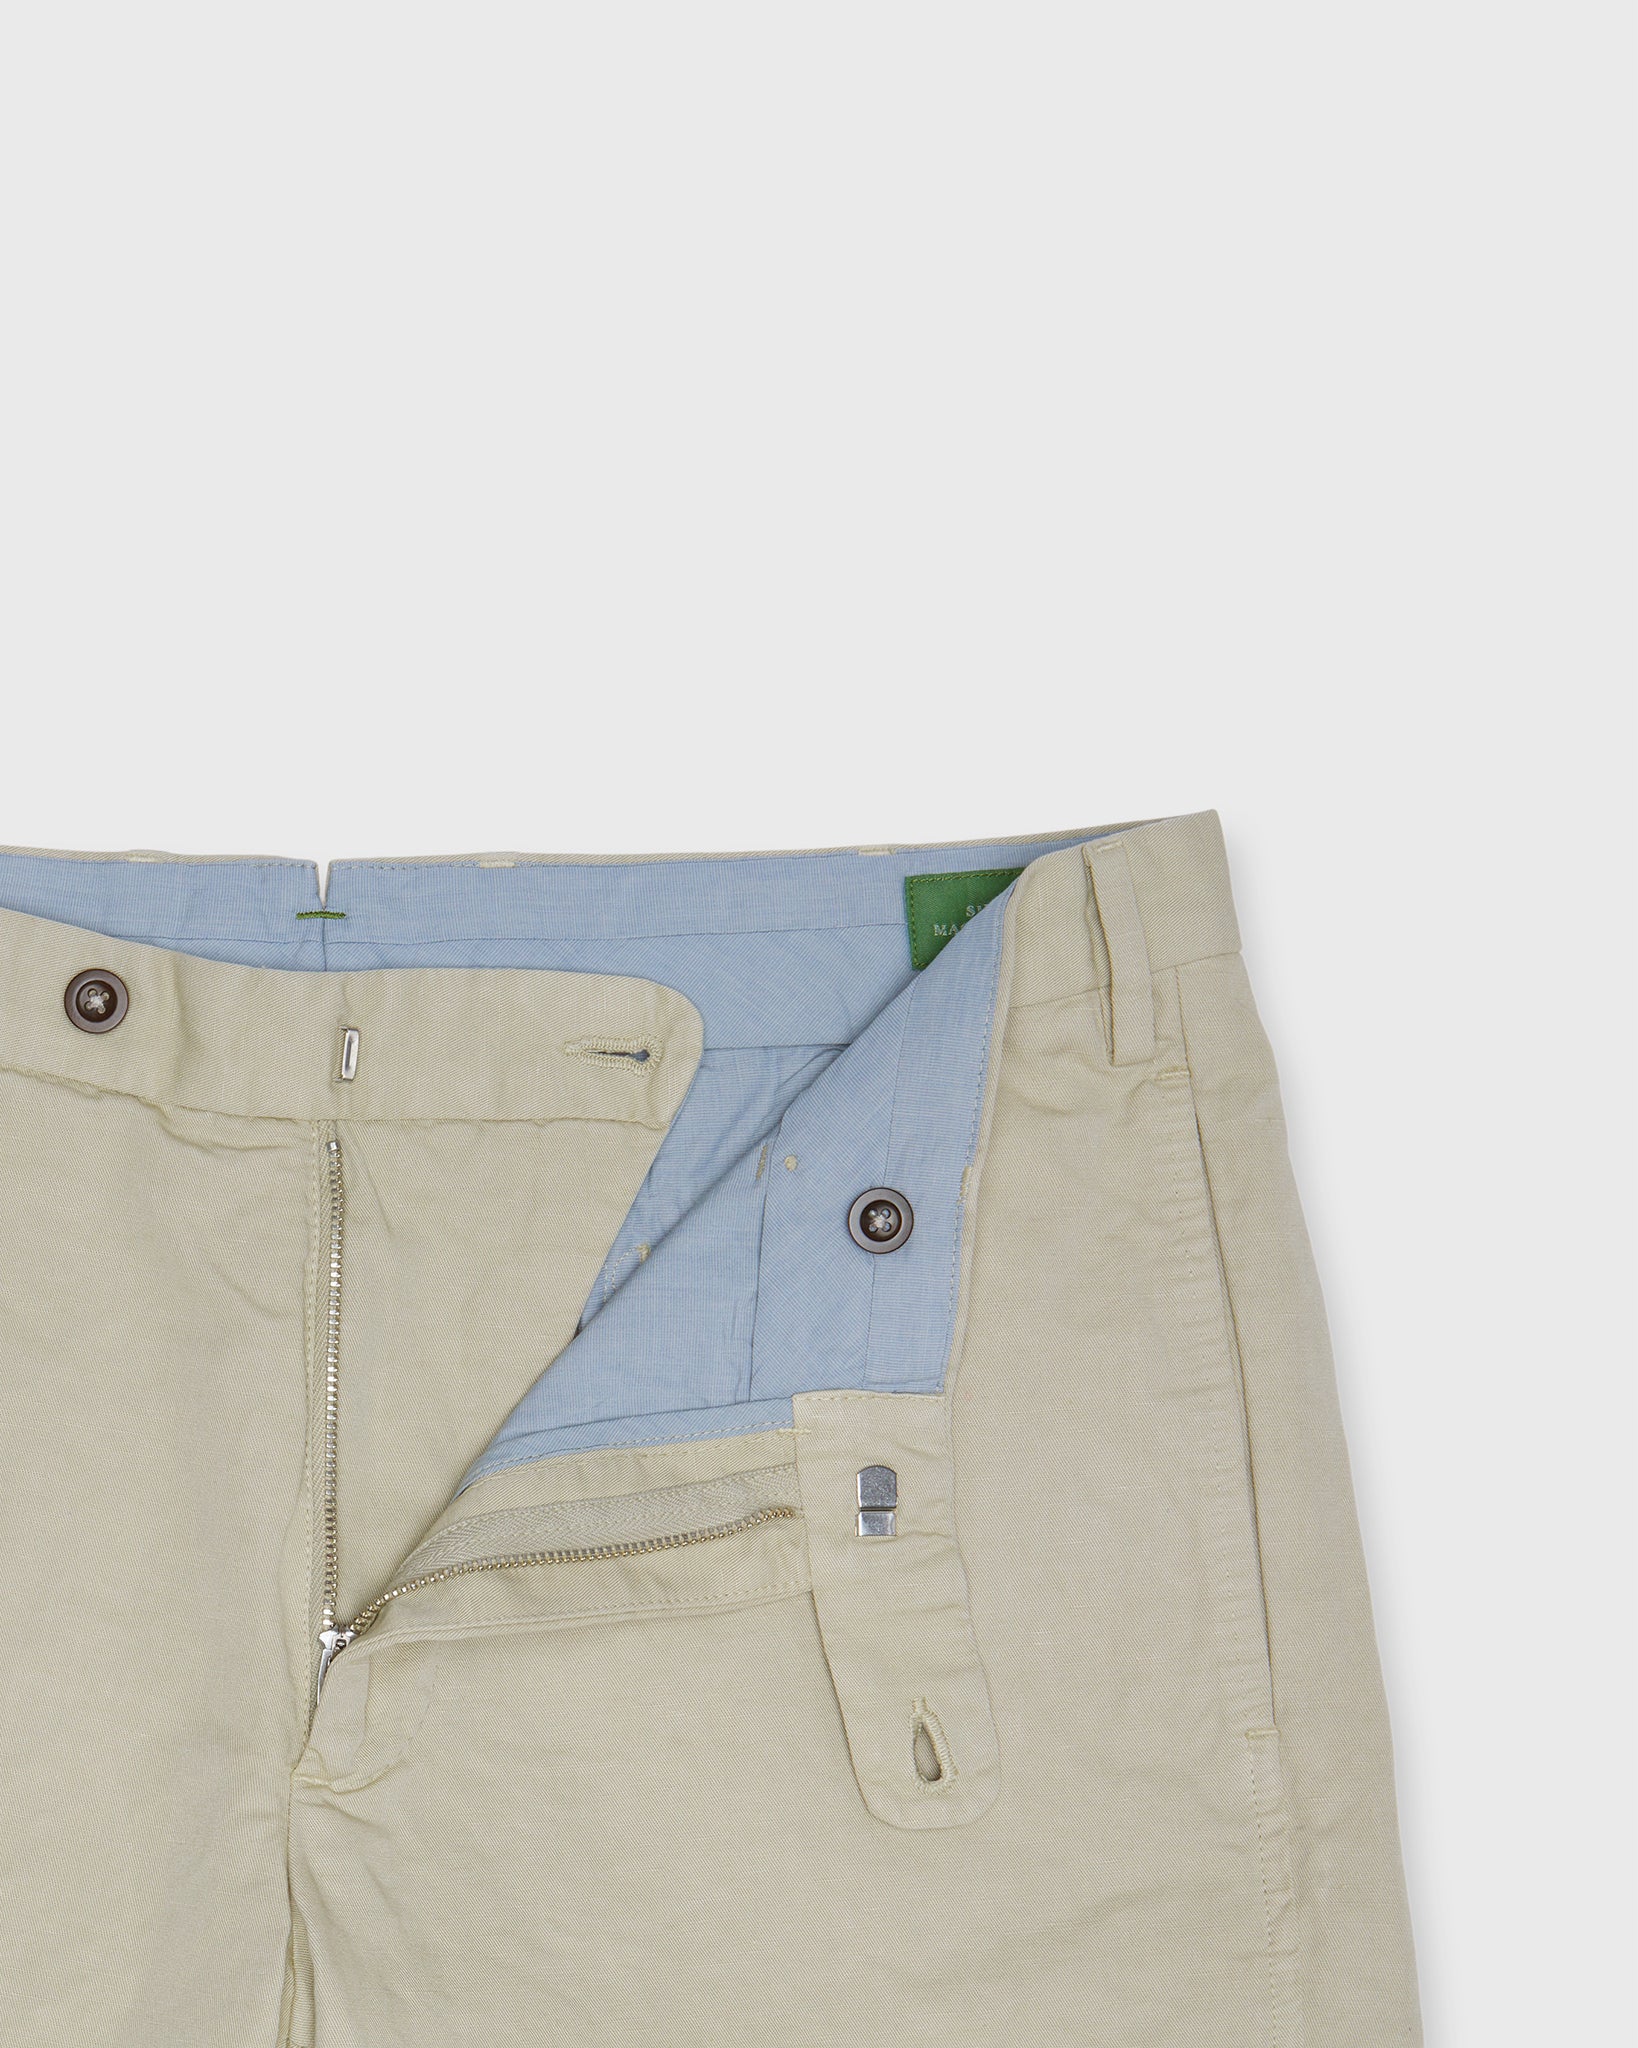 Garment-Dyed Short in Sand Cotolino Twill